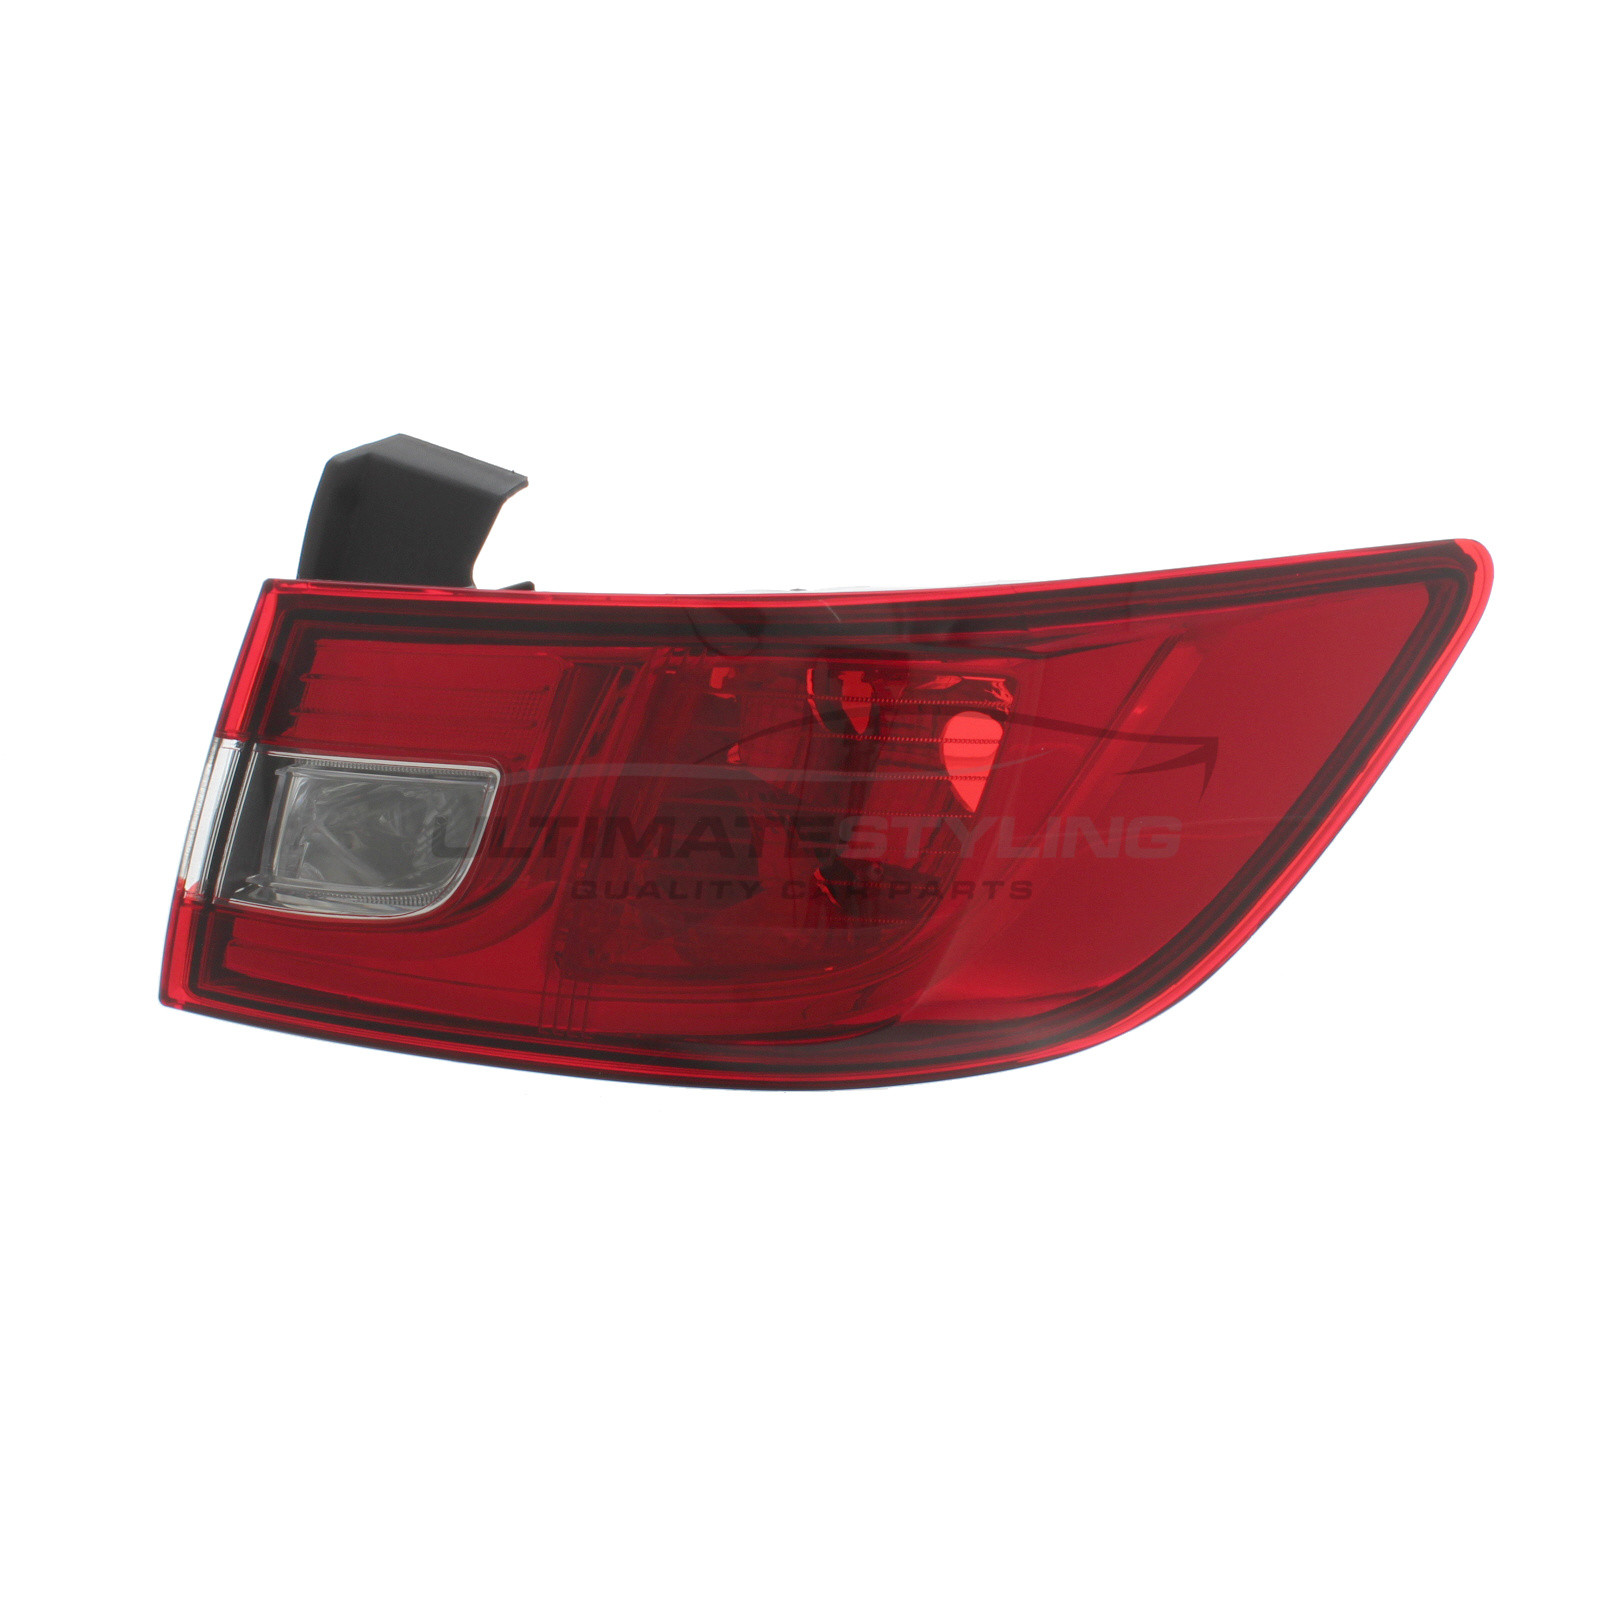 Renault Clio 2012-2016 Non-LED Outer (Wing) Rear Light / Tail Light Excluding Bulb Holder Drivers Side (RH)